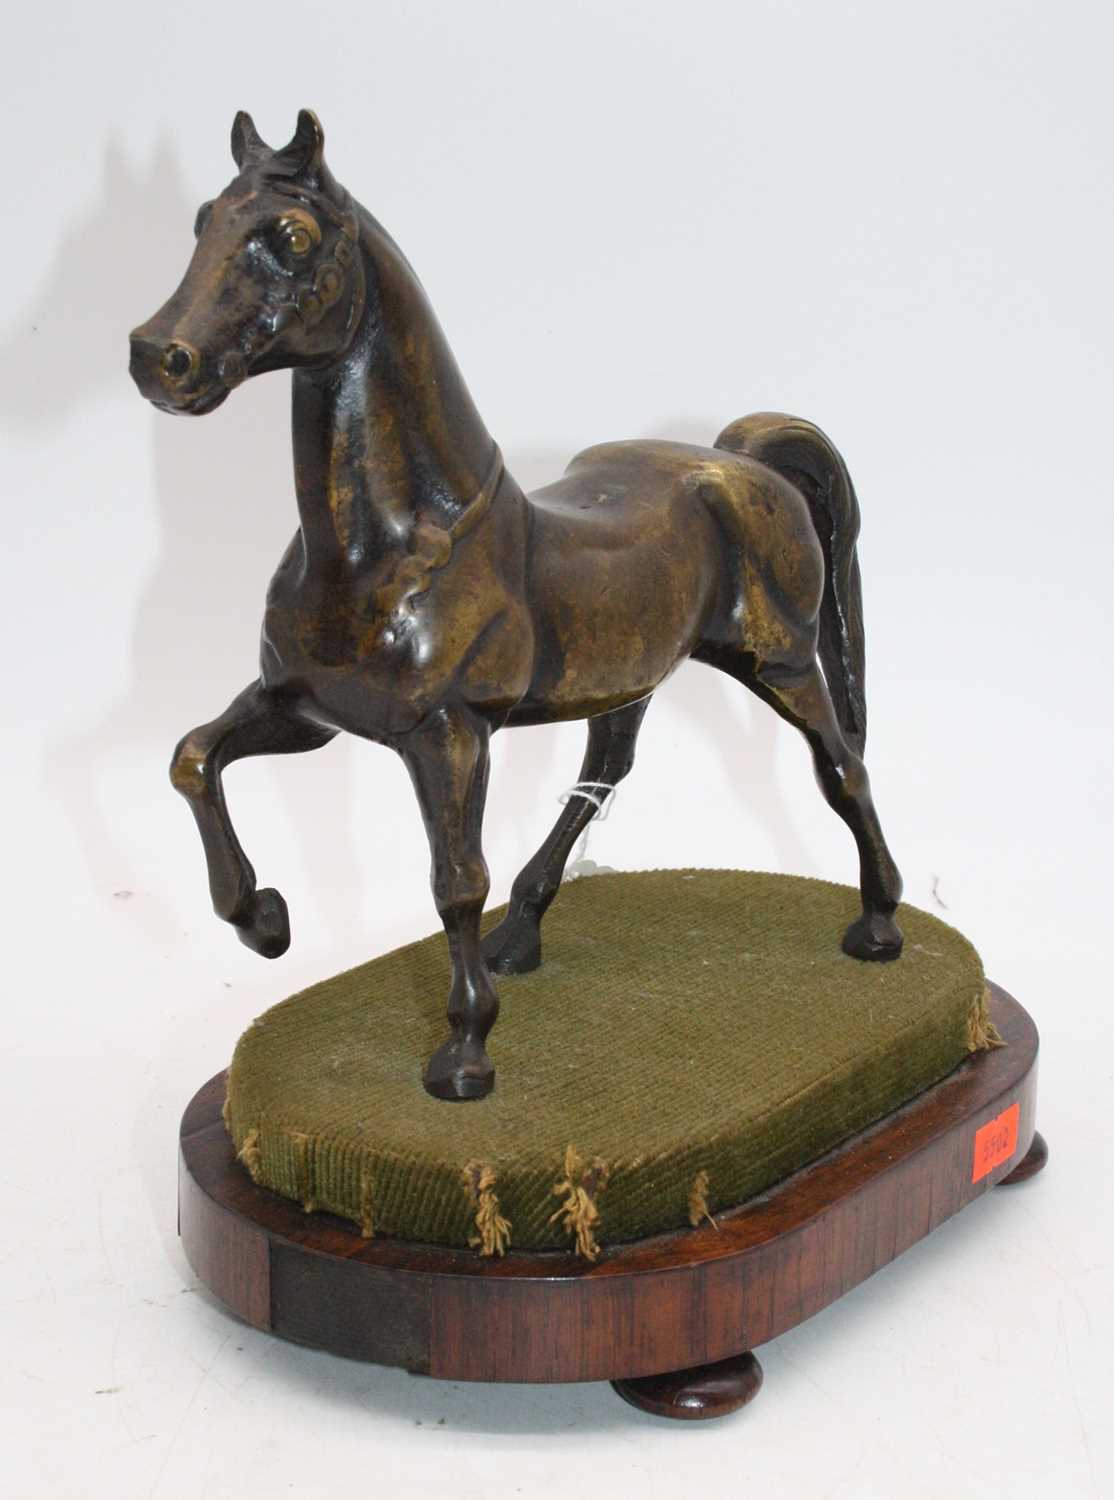 A bronze model of a horse, mounted upon a rosewood plinth, h.24cmThe horse and base appear to be a